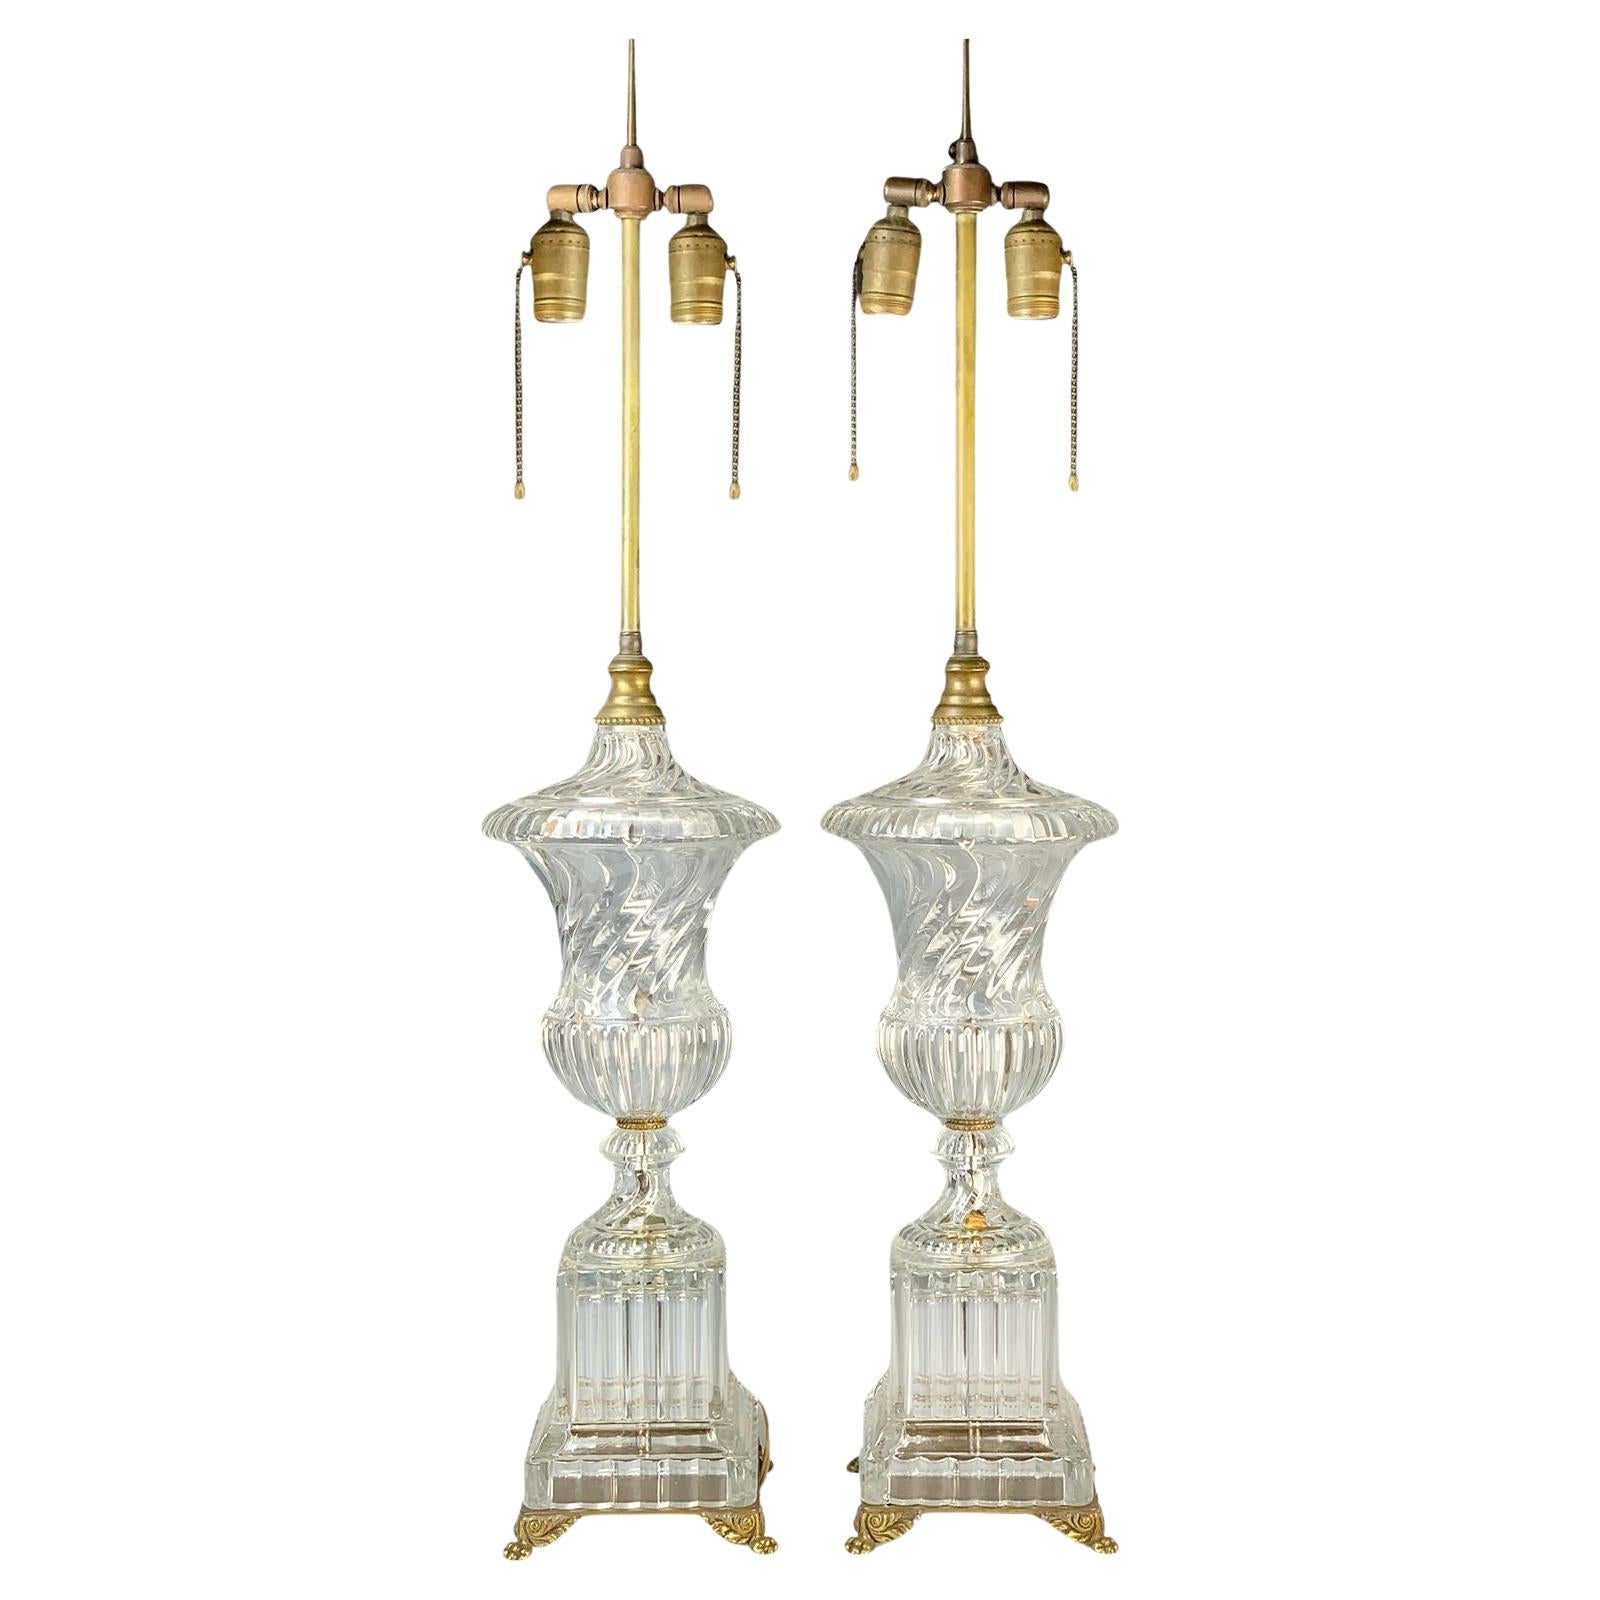 Pair of Baccarat Swirl Crystal Table Lamps w/ Bronze Accents, c. 1920's For Sale